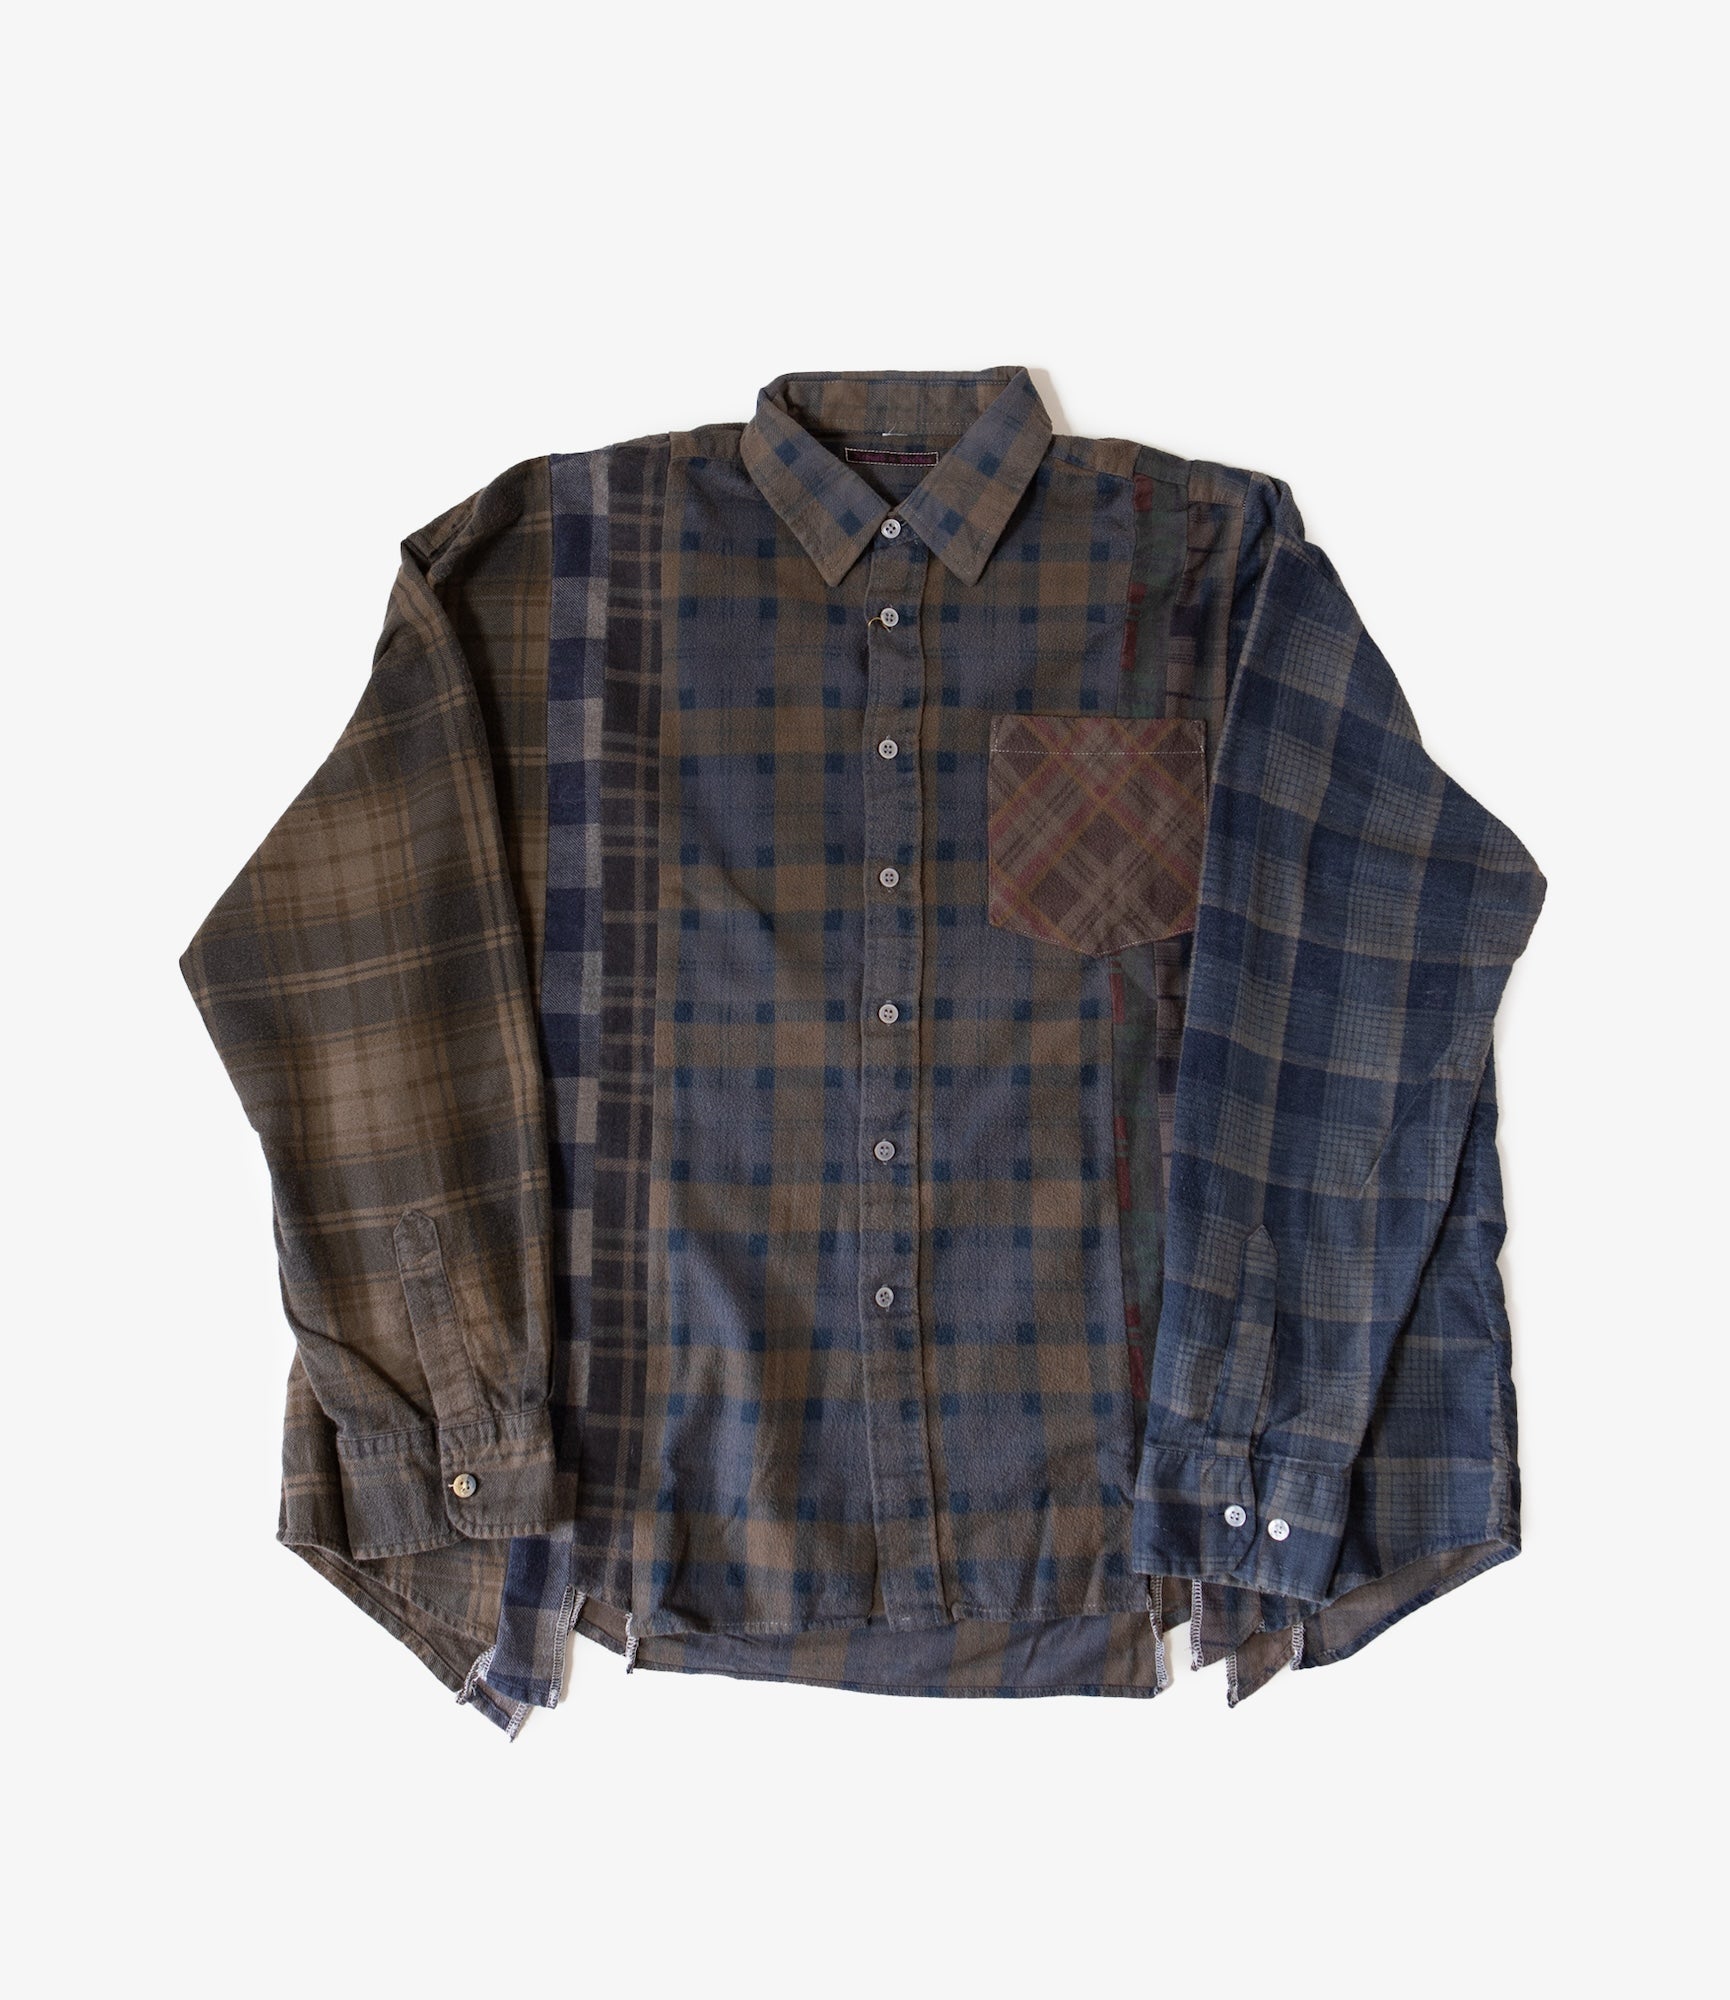 Rebuild by Needles Flannel Shirt - 7 Cuts Wide / Over Dye - Brown